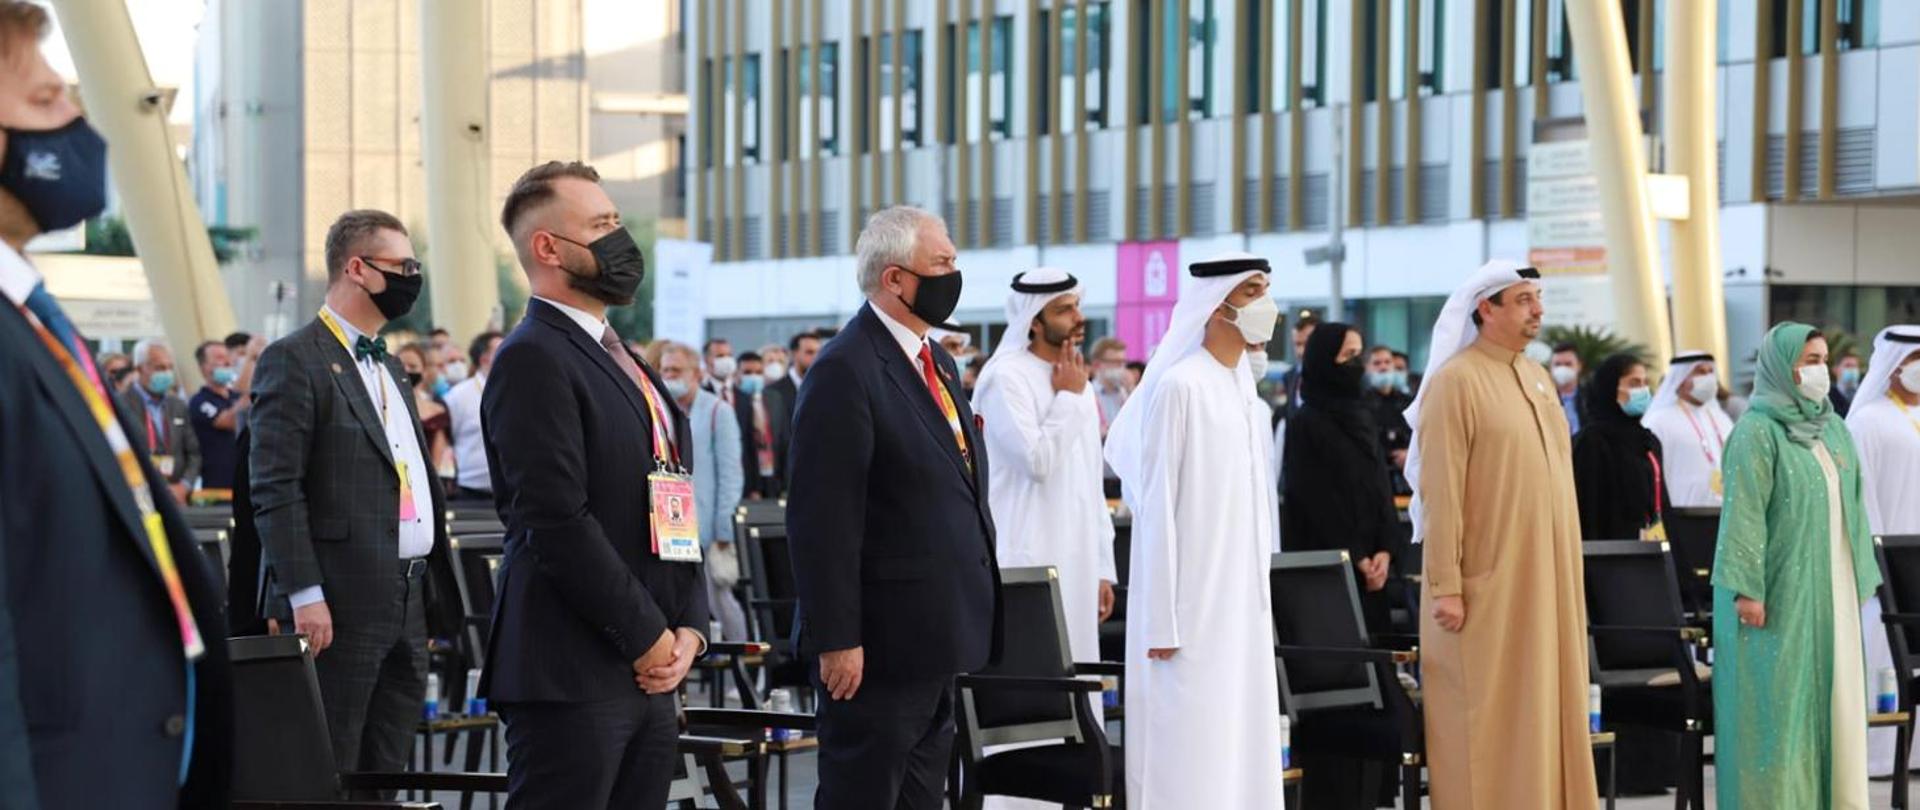 Deputy Minister Grzegorz Piechowiak stands at attention next to other people, including Dubai sheikhs.